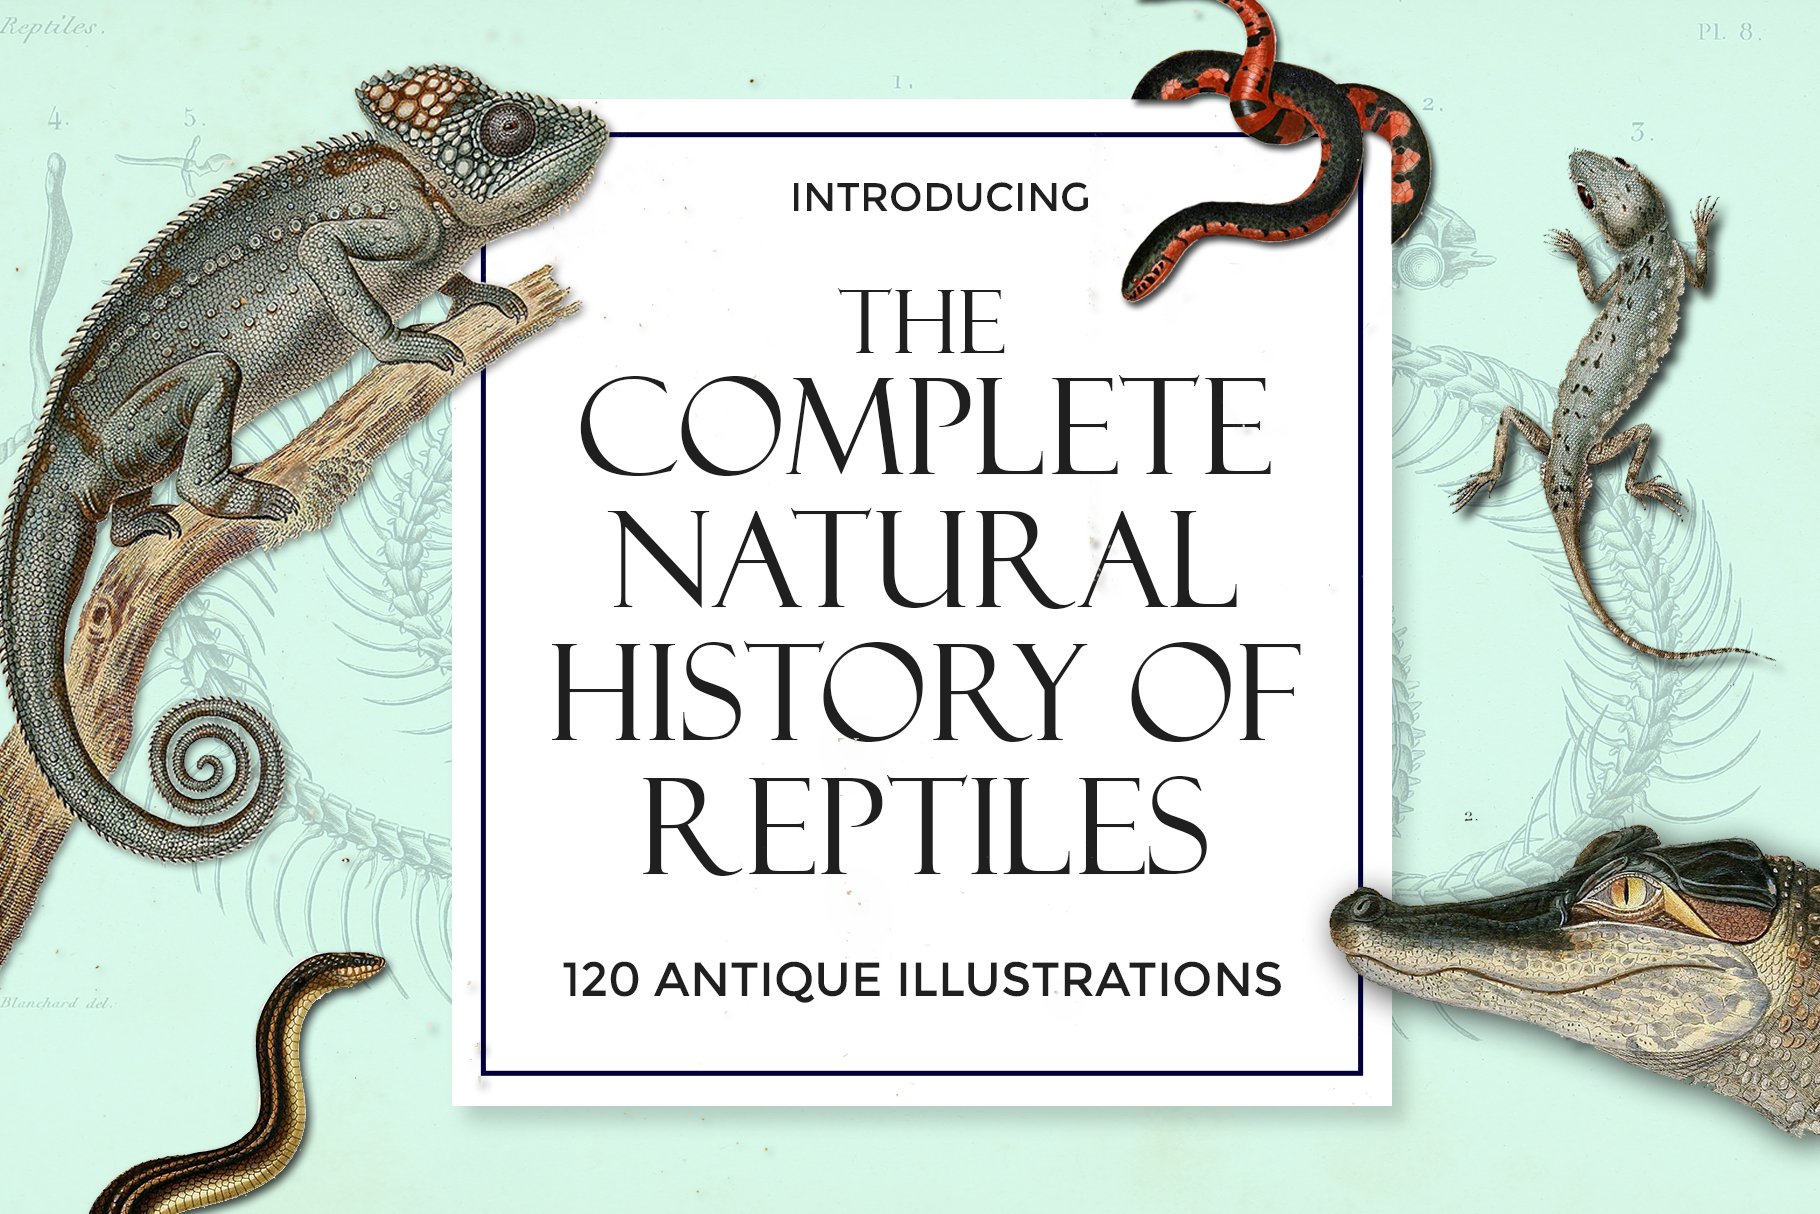 The Complete Natural History of Reptiles